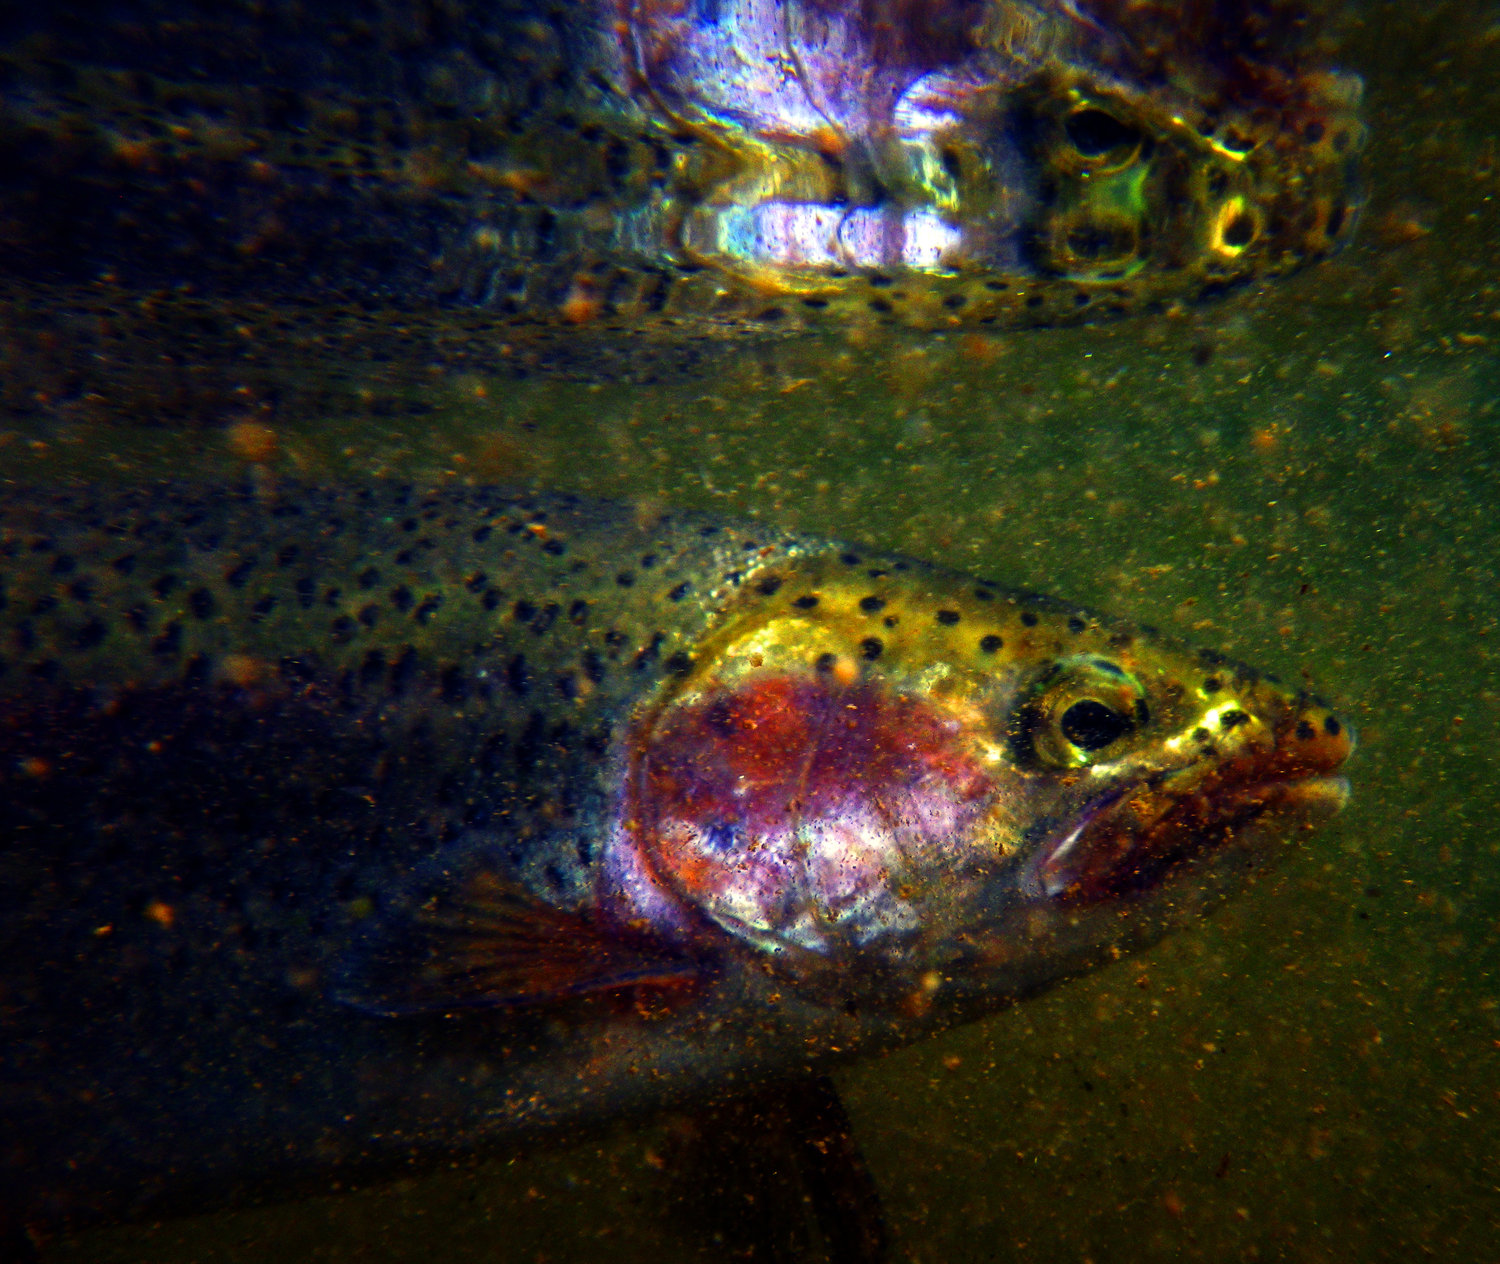 Peter Kolesar's photo of a Delaware River rainbow trout was the winner in the wildlife category in the Delaware Highlands Conservancy's photography contest.